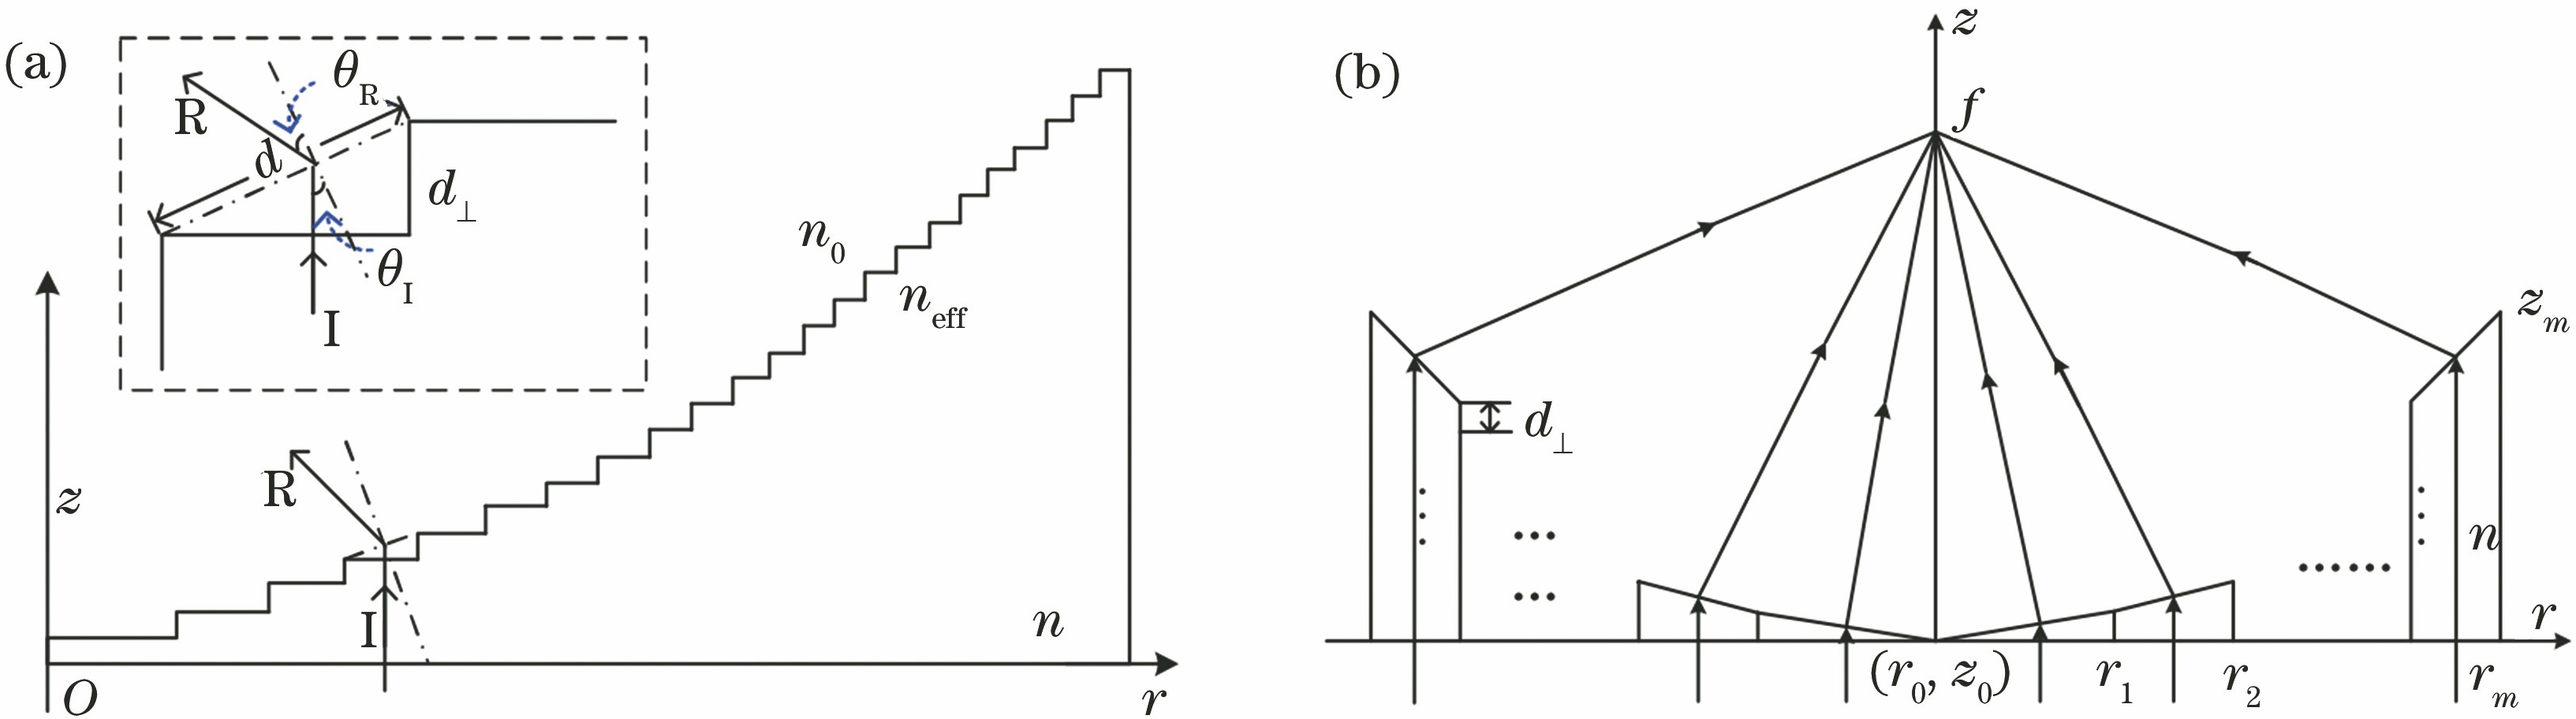 Profile of plane-concave lens and schematic of focusing process. (a) Cross-section of plane-concave lens in r-z plane; (b) schematic of focusing process